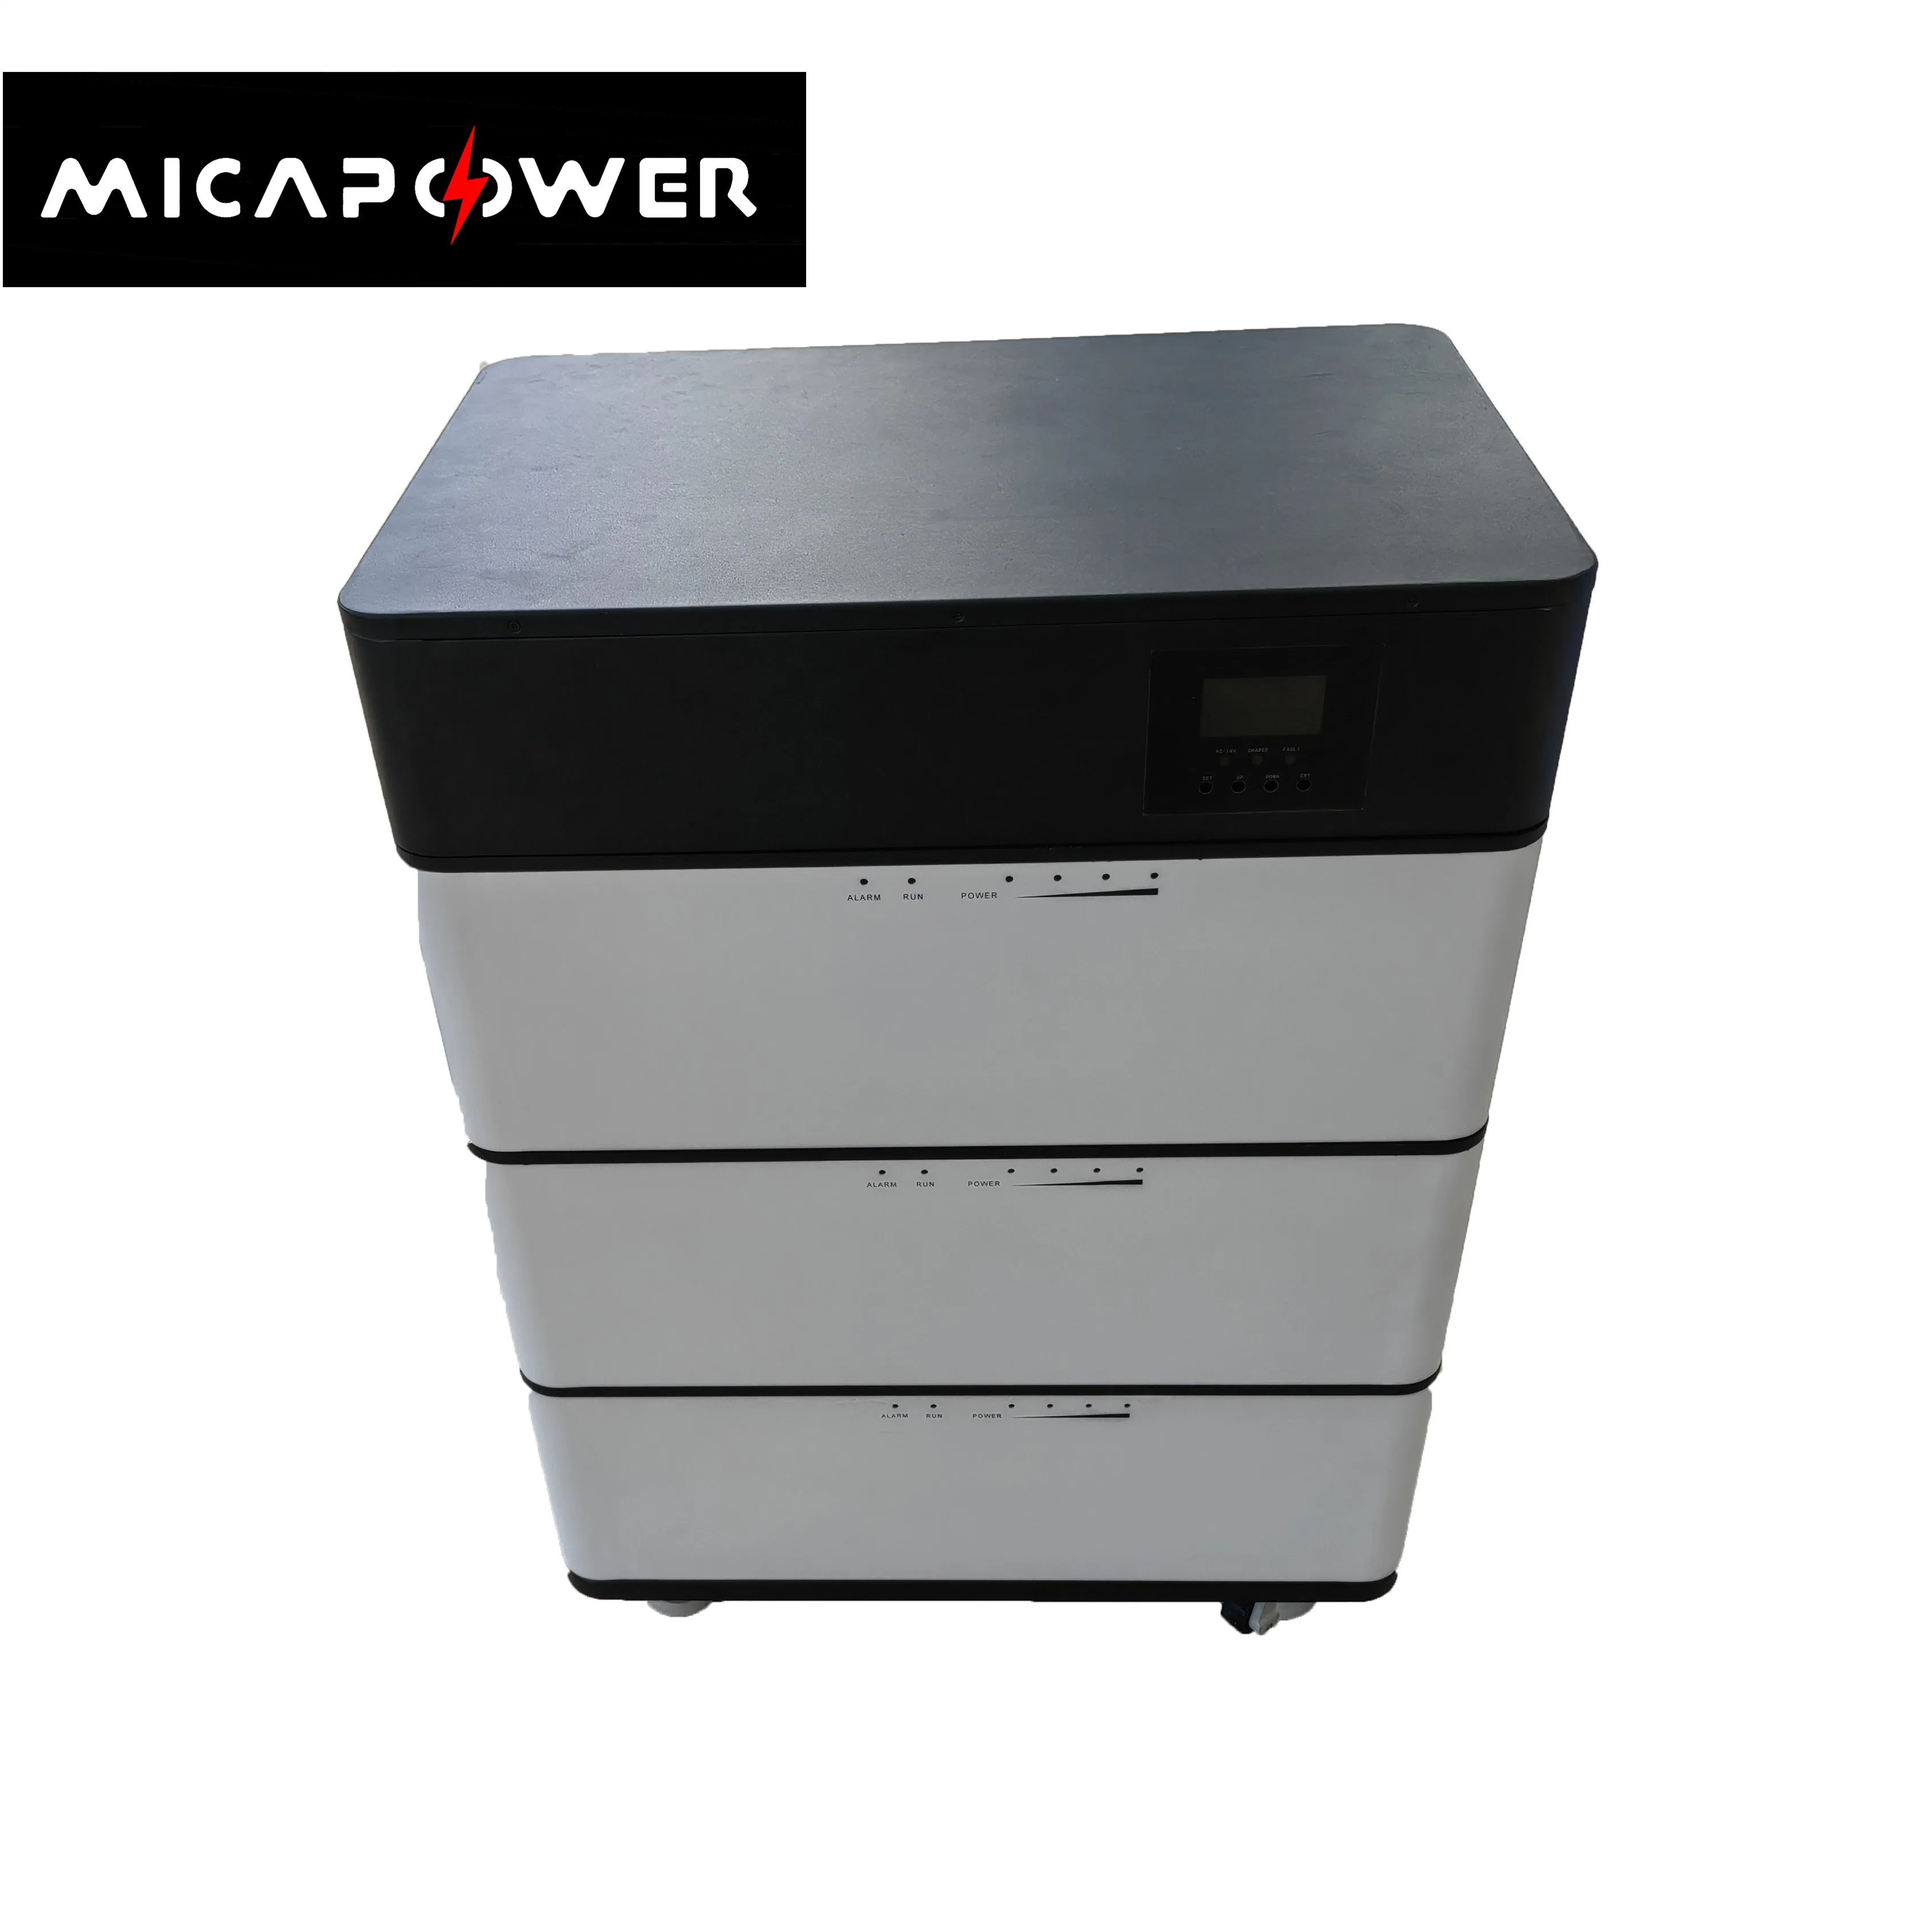 153.6V 100ah Solar Battery LiFePO4 LFP Renewable off Grid Power Supply 15kwh Energy Storage Battery with 10kw Inverter